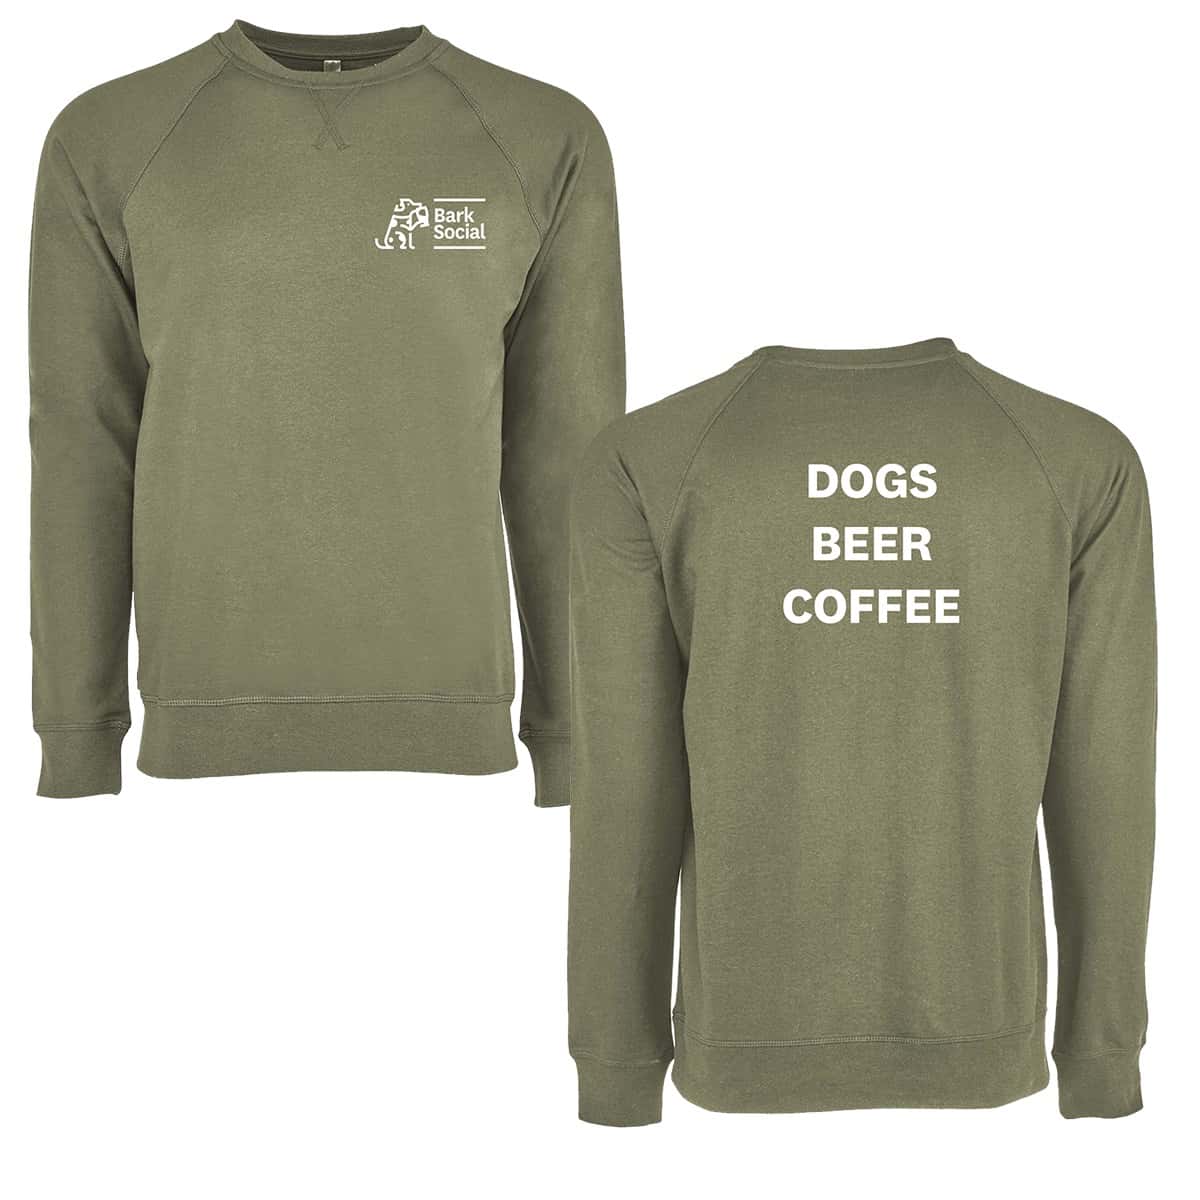 DOGS BEER COFFEE French Terry Raglan Crew Extra Small / Military Green Bark Social